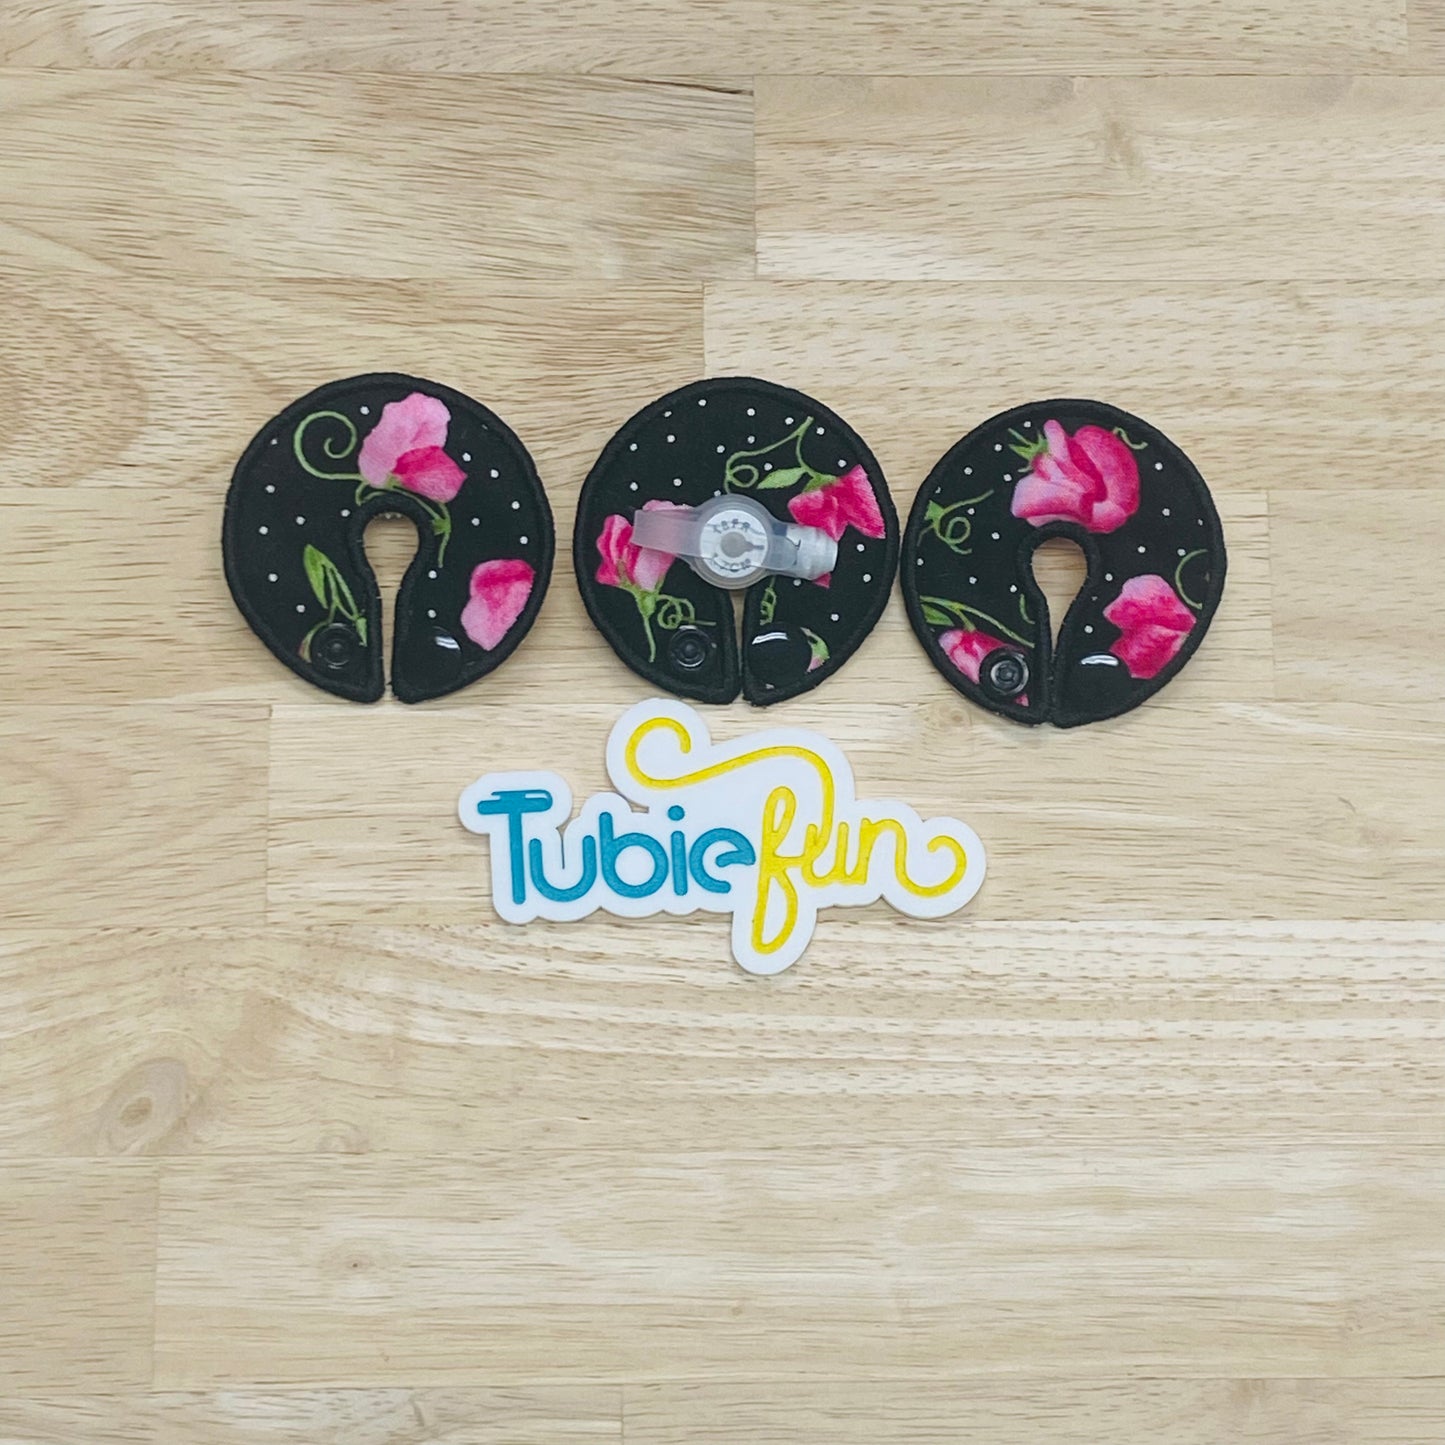 G-Tube Button Pad Cover - Pink Roses on Black